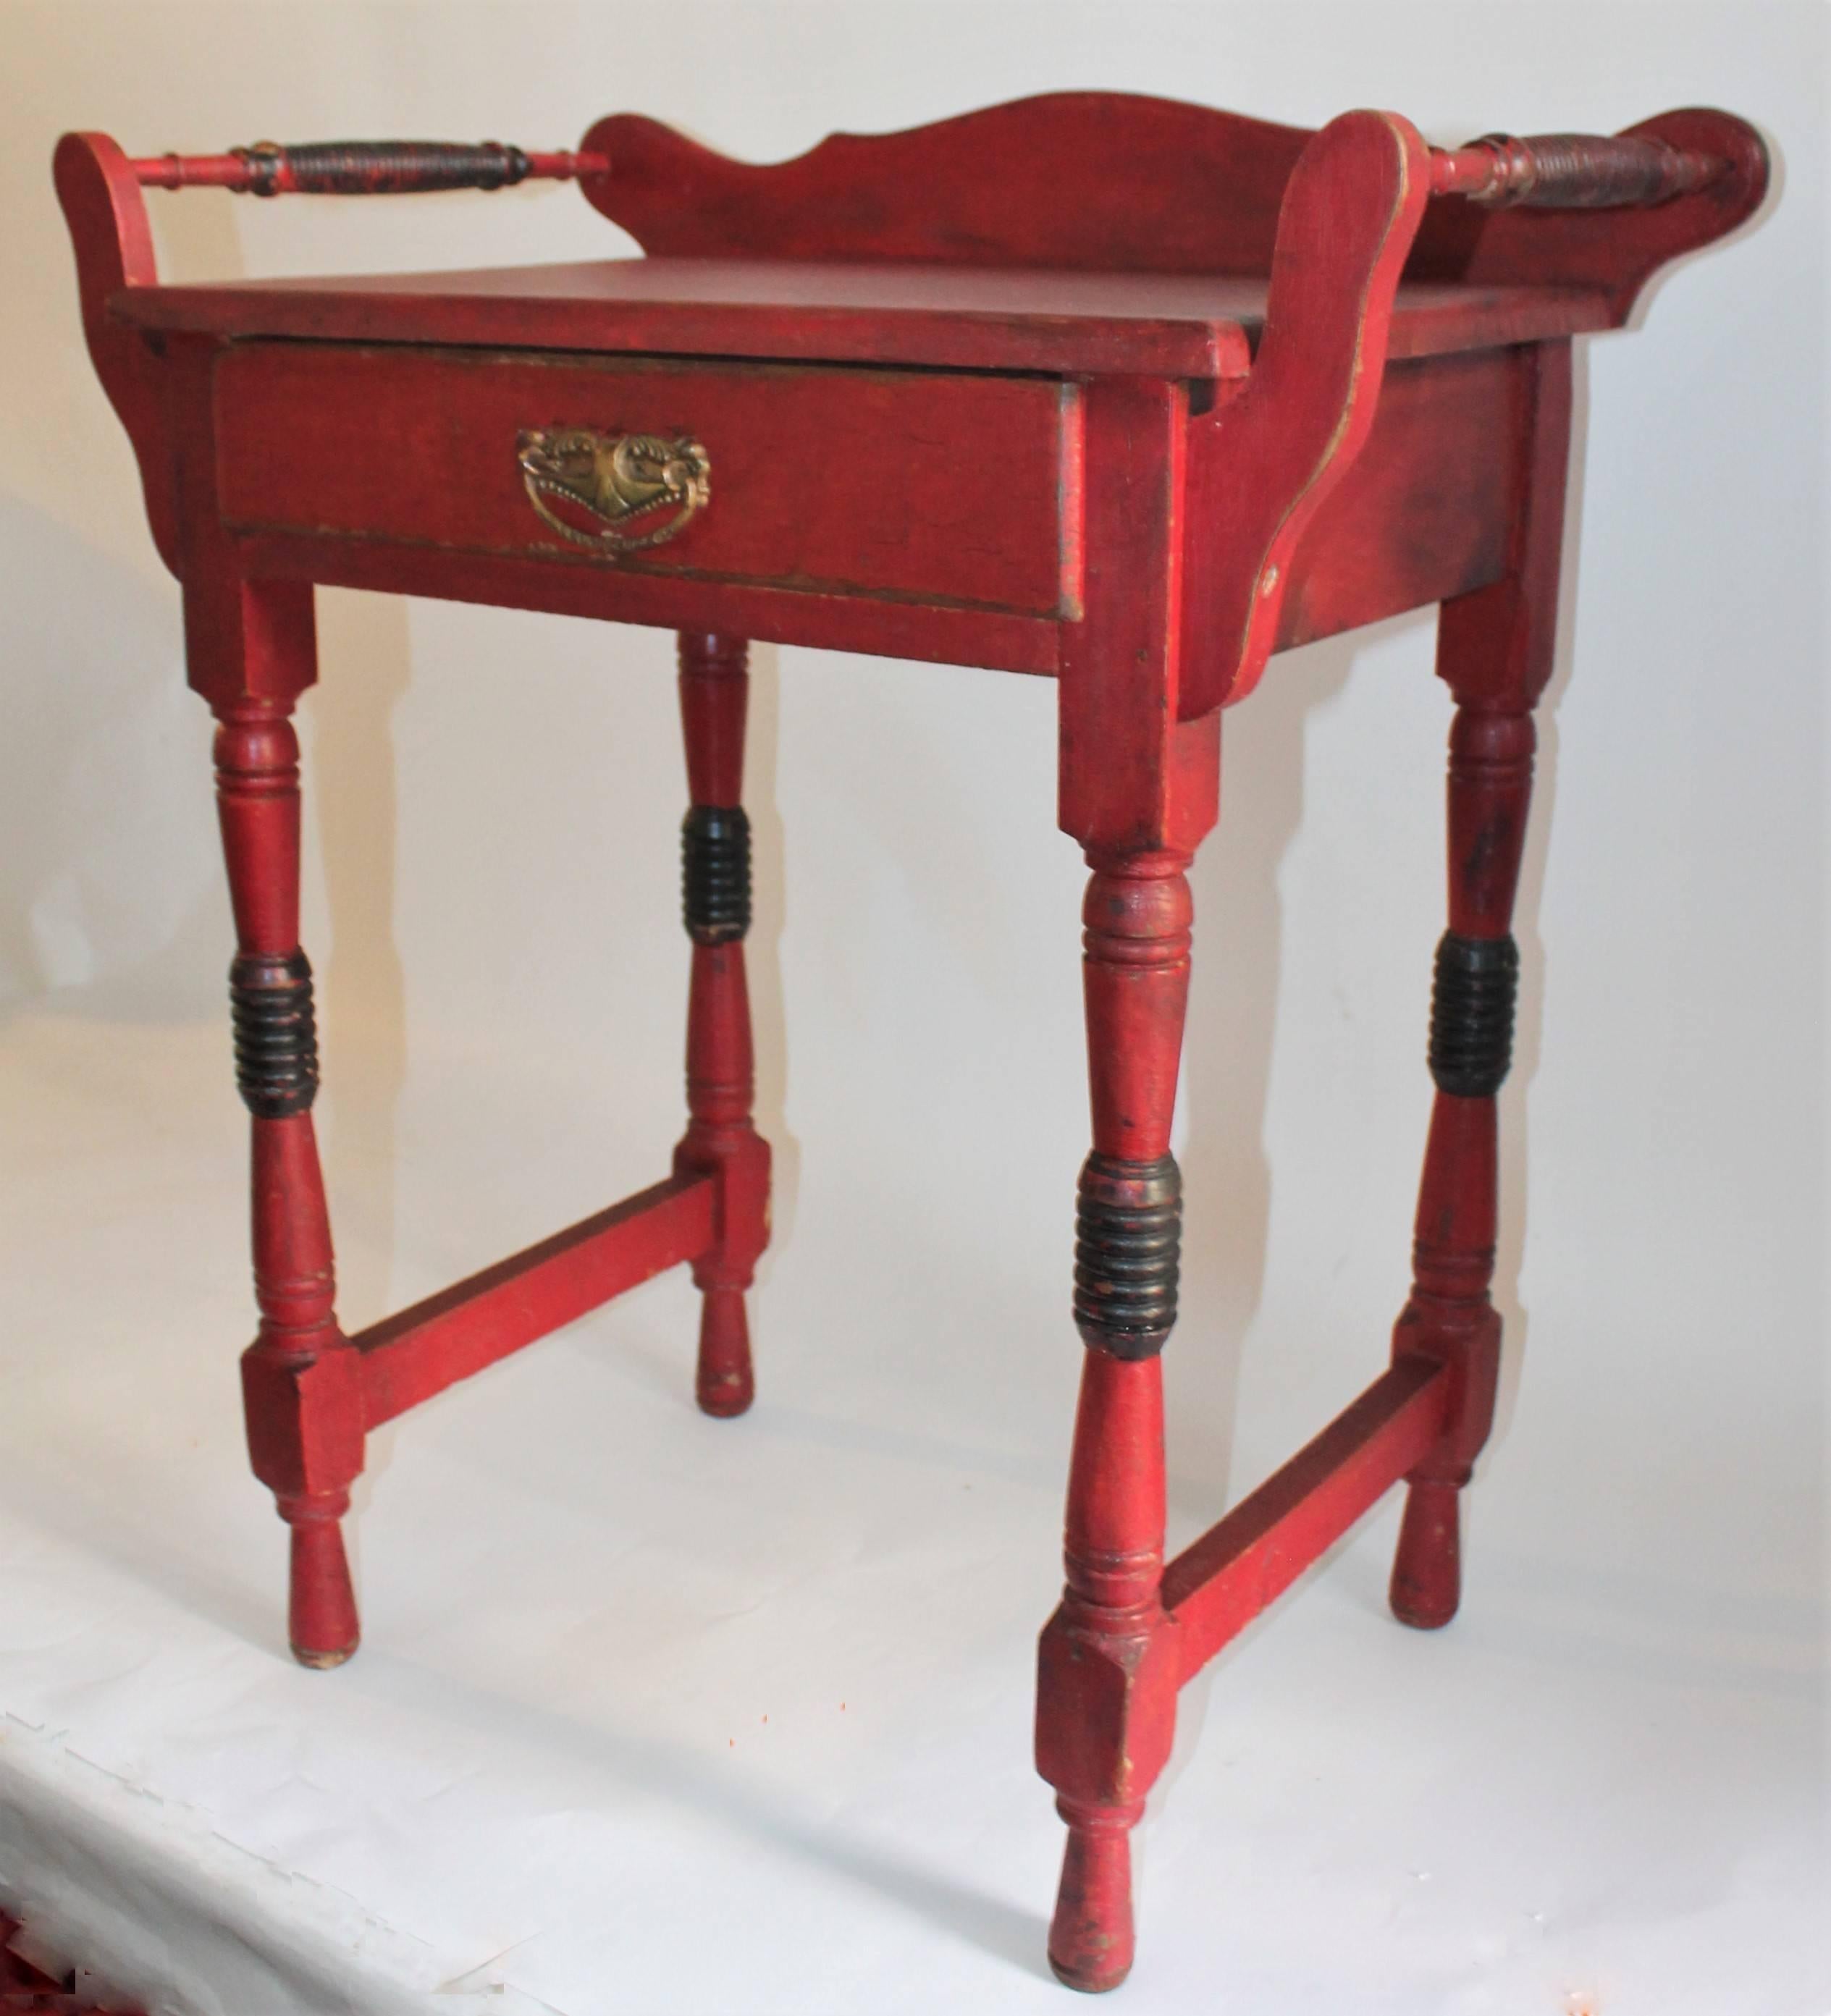 This fantastic 19th century original crackle red with black trim nightstand or side table is in great condition and is very sturdy. The end rods were made for hanging show towels in a bathroom or bed room with the old wash bowl and pitcher set .This